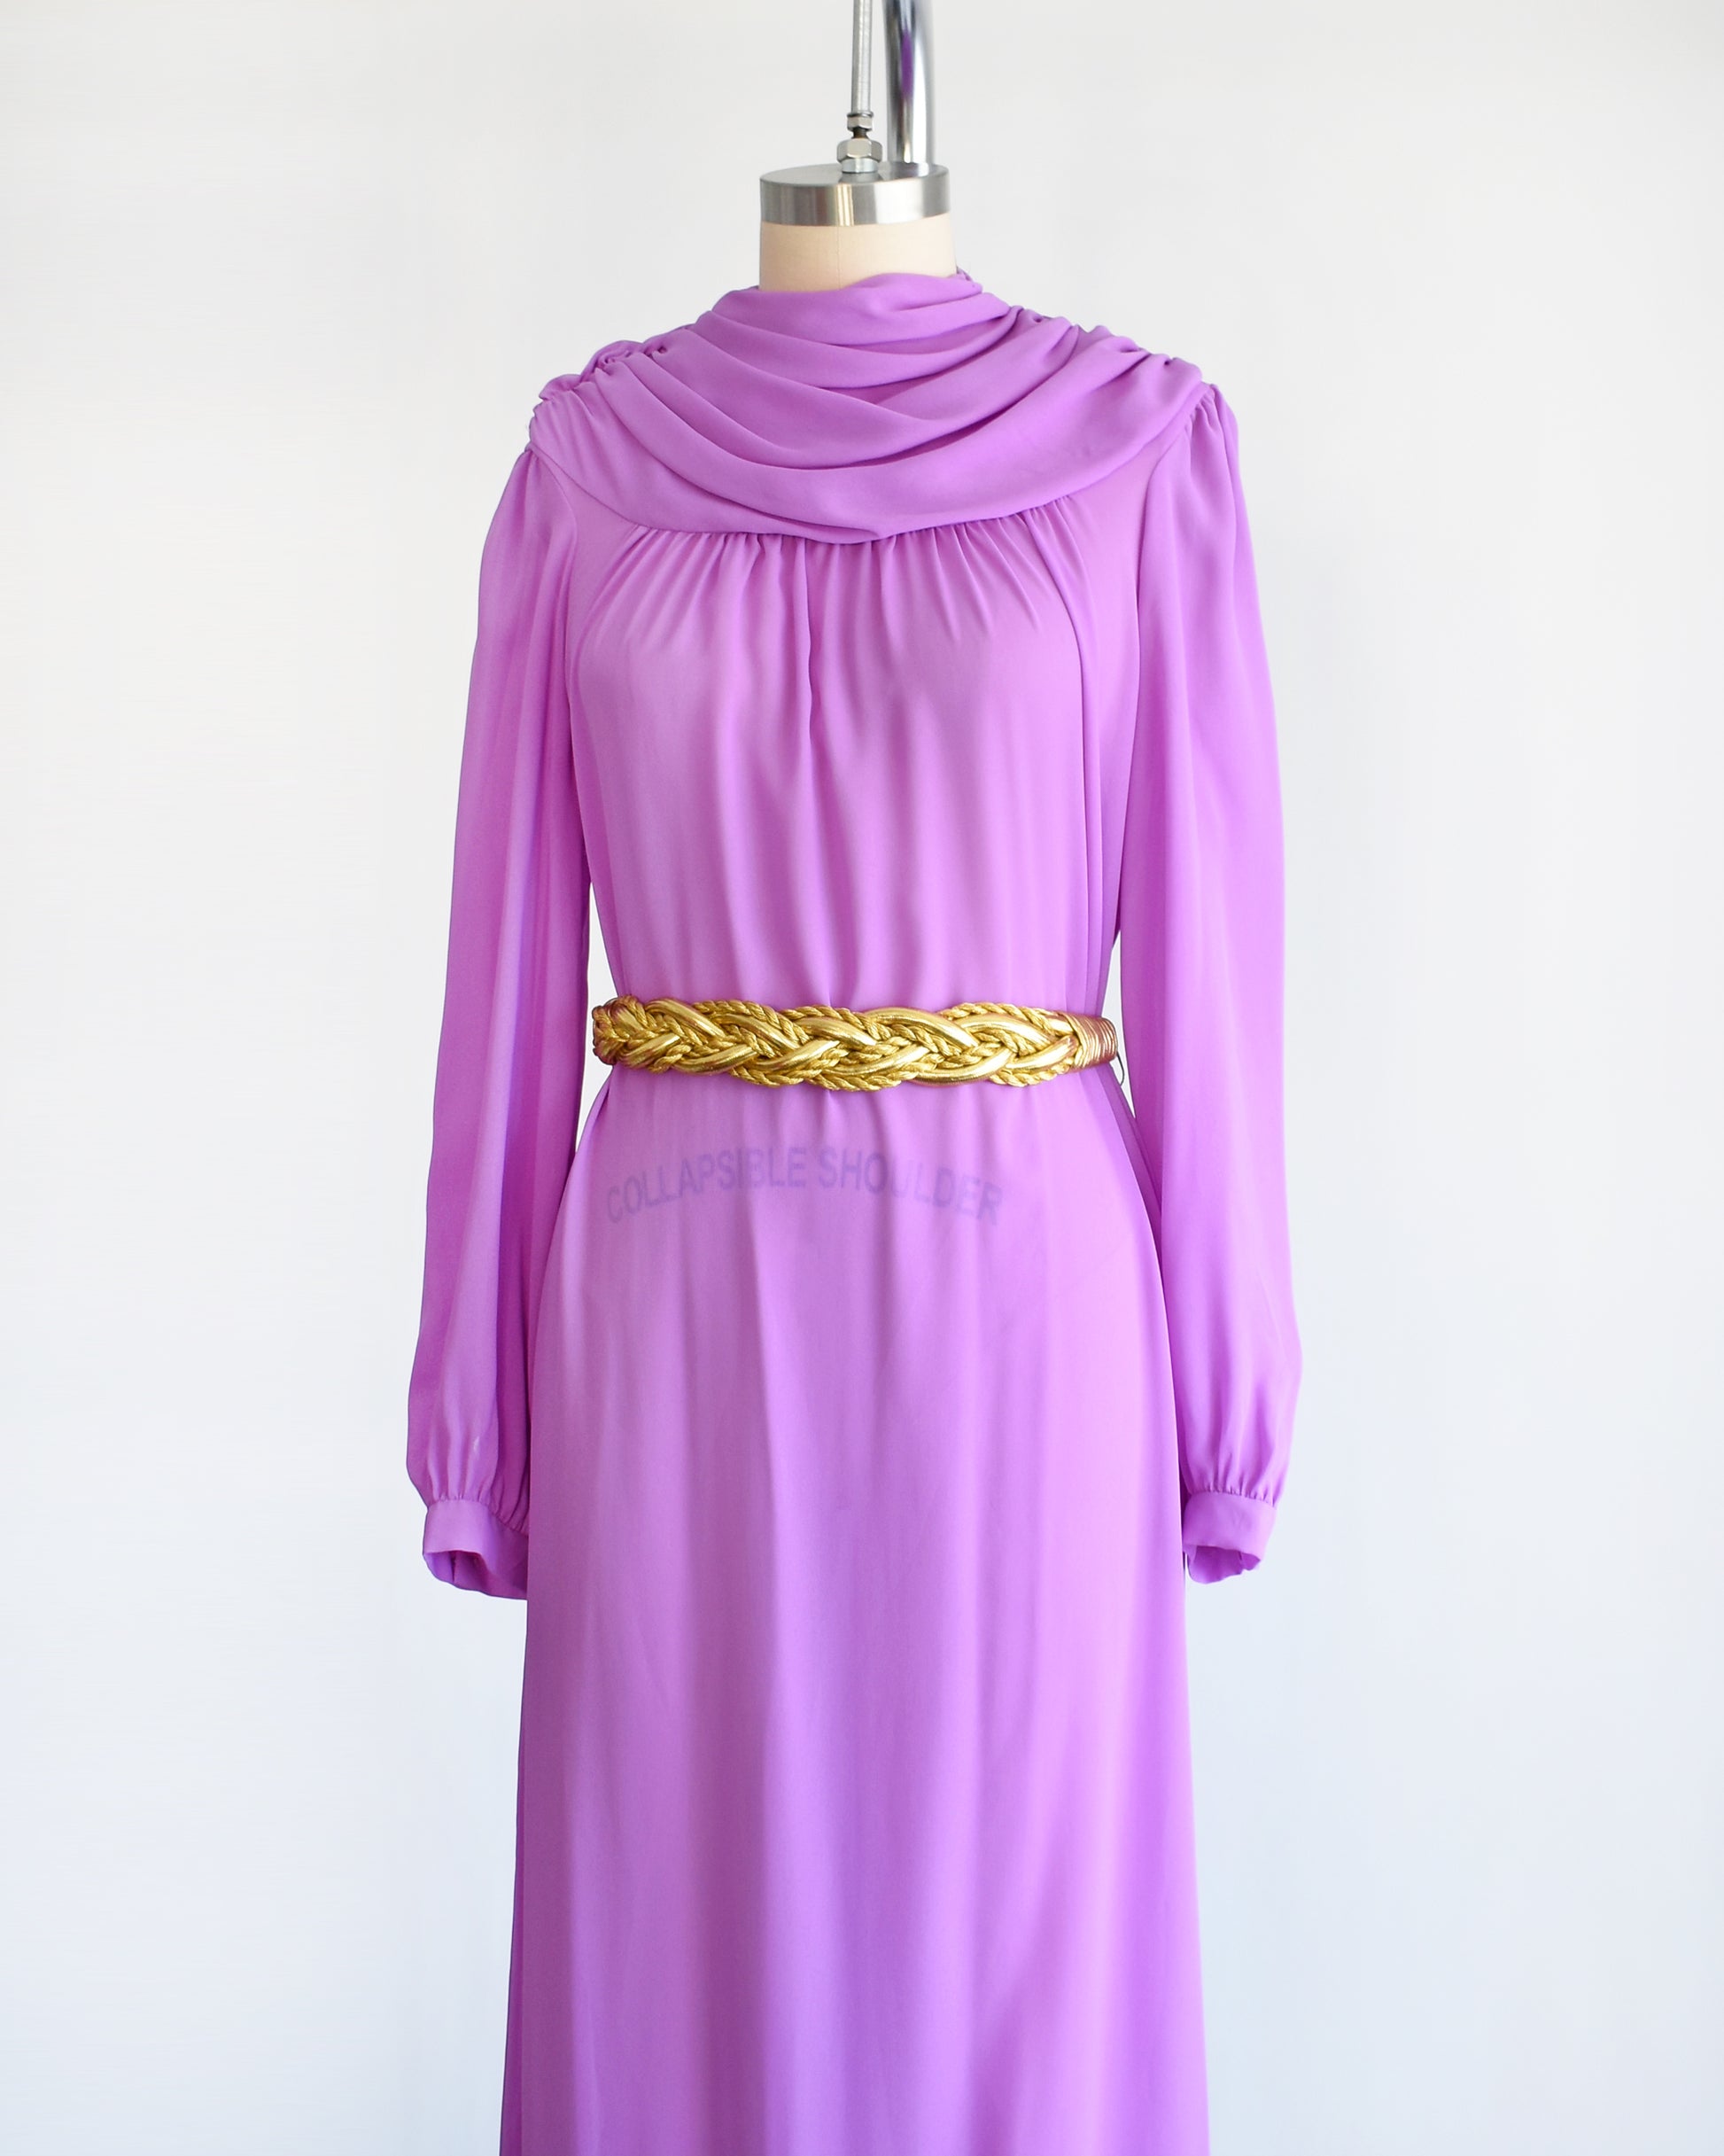 Side front view of a vintage 1970s purple semi sheer maxi dress by Joy Stevens California that has a draped neckline and long sleeves with gold belt which isn't included